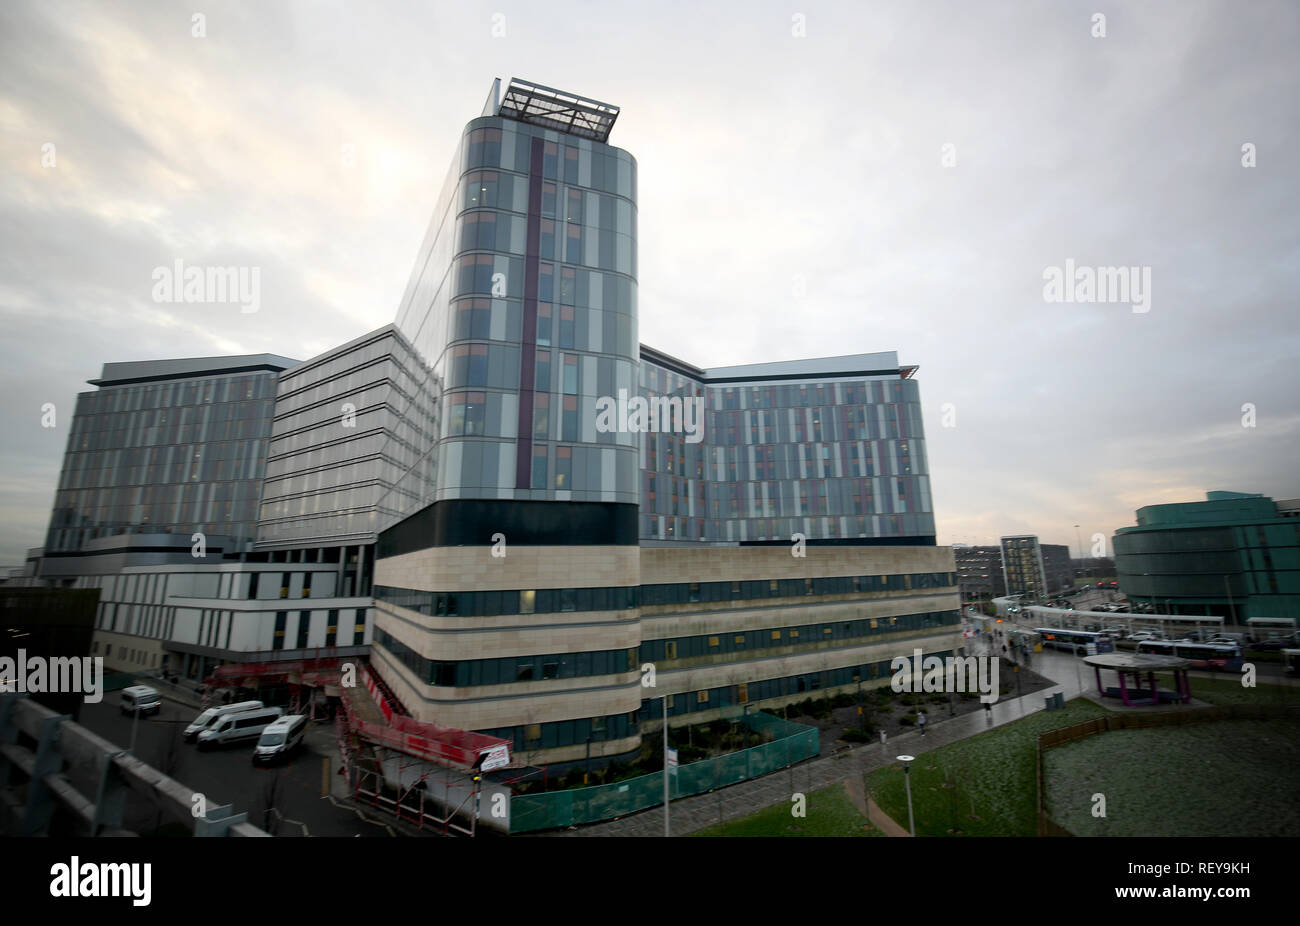 Queen Elizabeth University Hospital in Glasgow, Scotland's health secretary has said she believes infection control is good enough at the hospital where two patients died after contracting an infection linked to pigeon droppings. Stock Photo